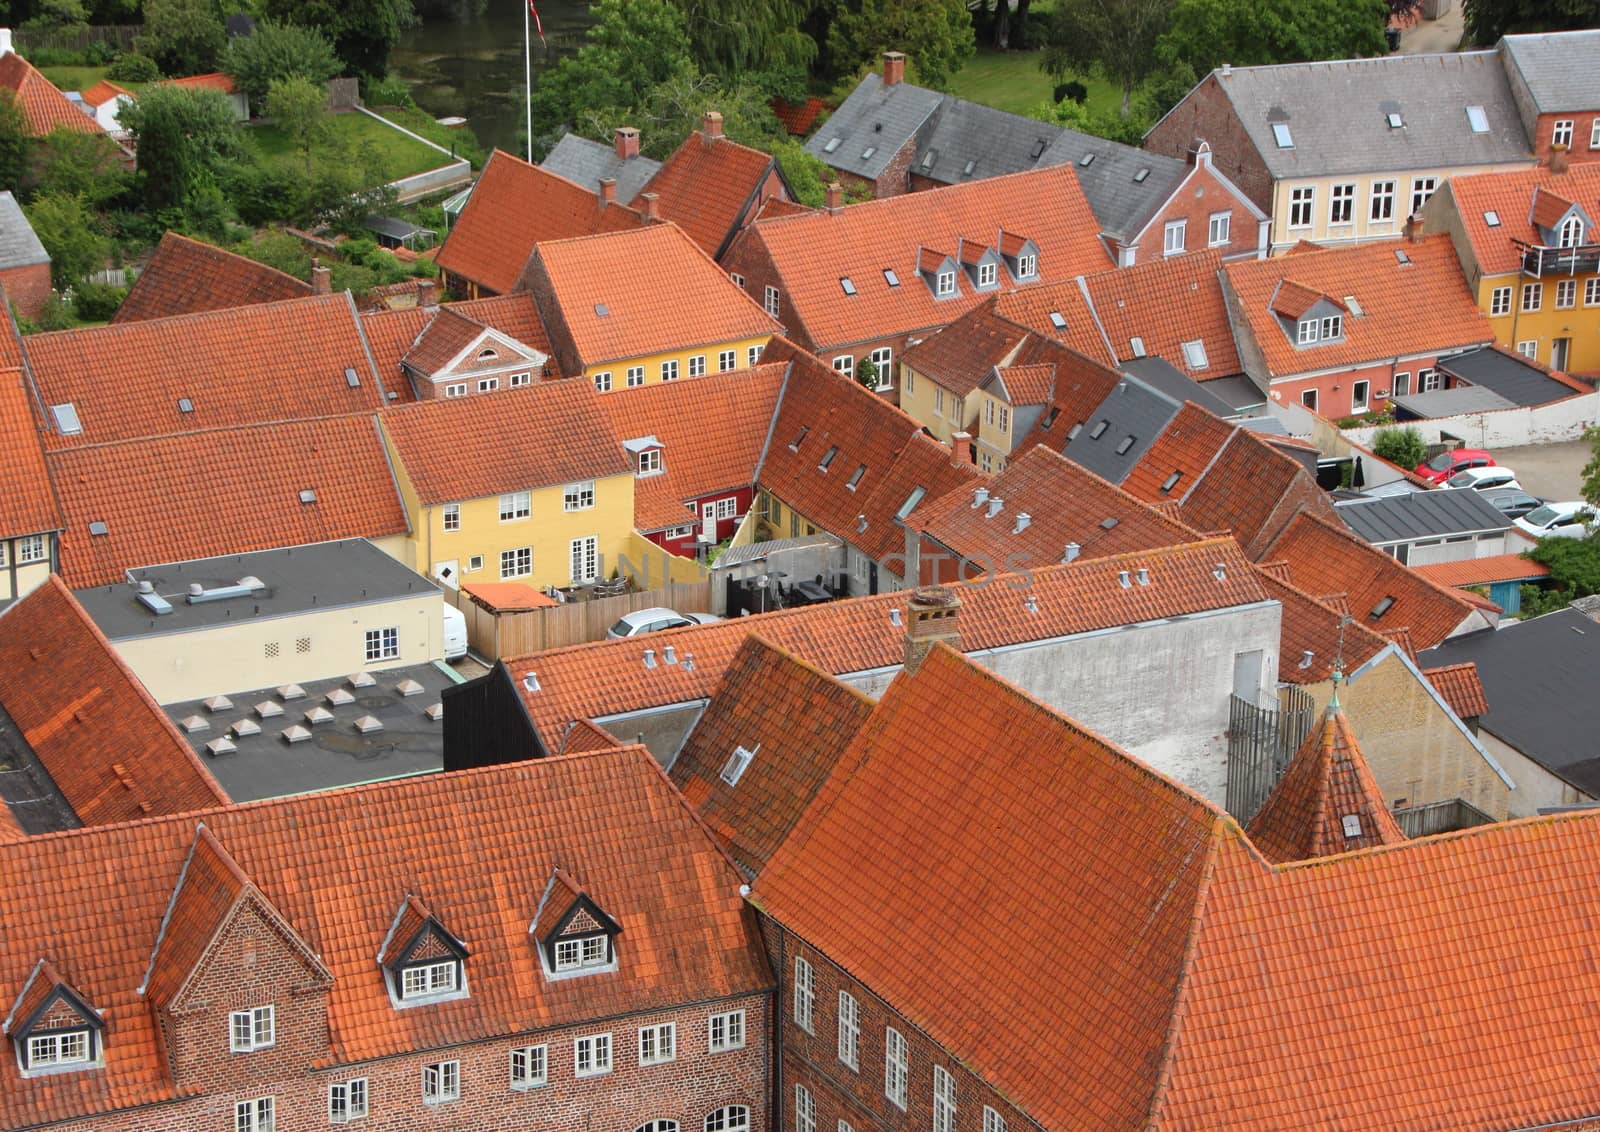 City with Red Tile Roof in Birdseye Perspective by HoleInTheBox